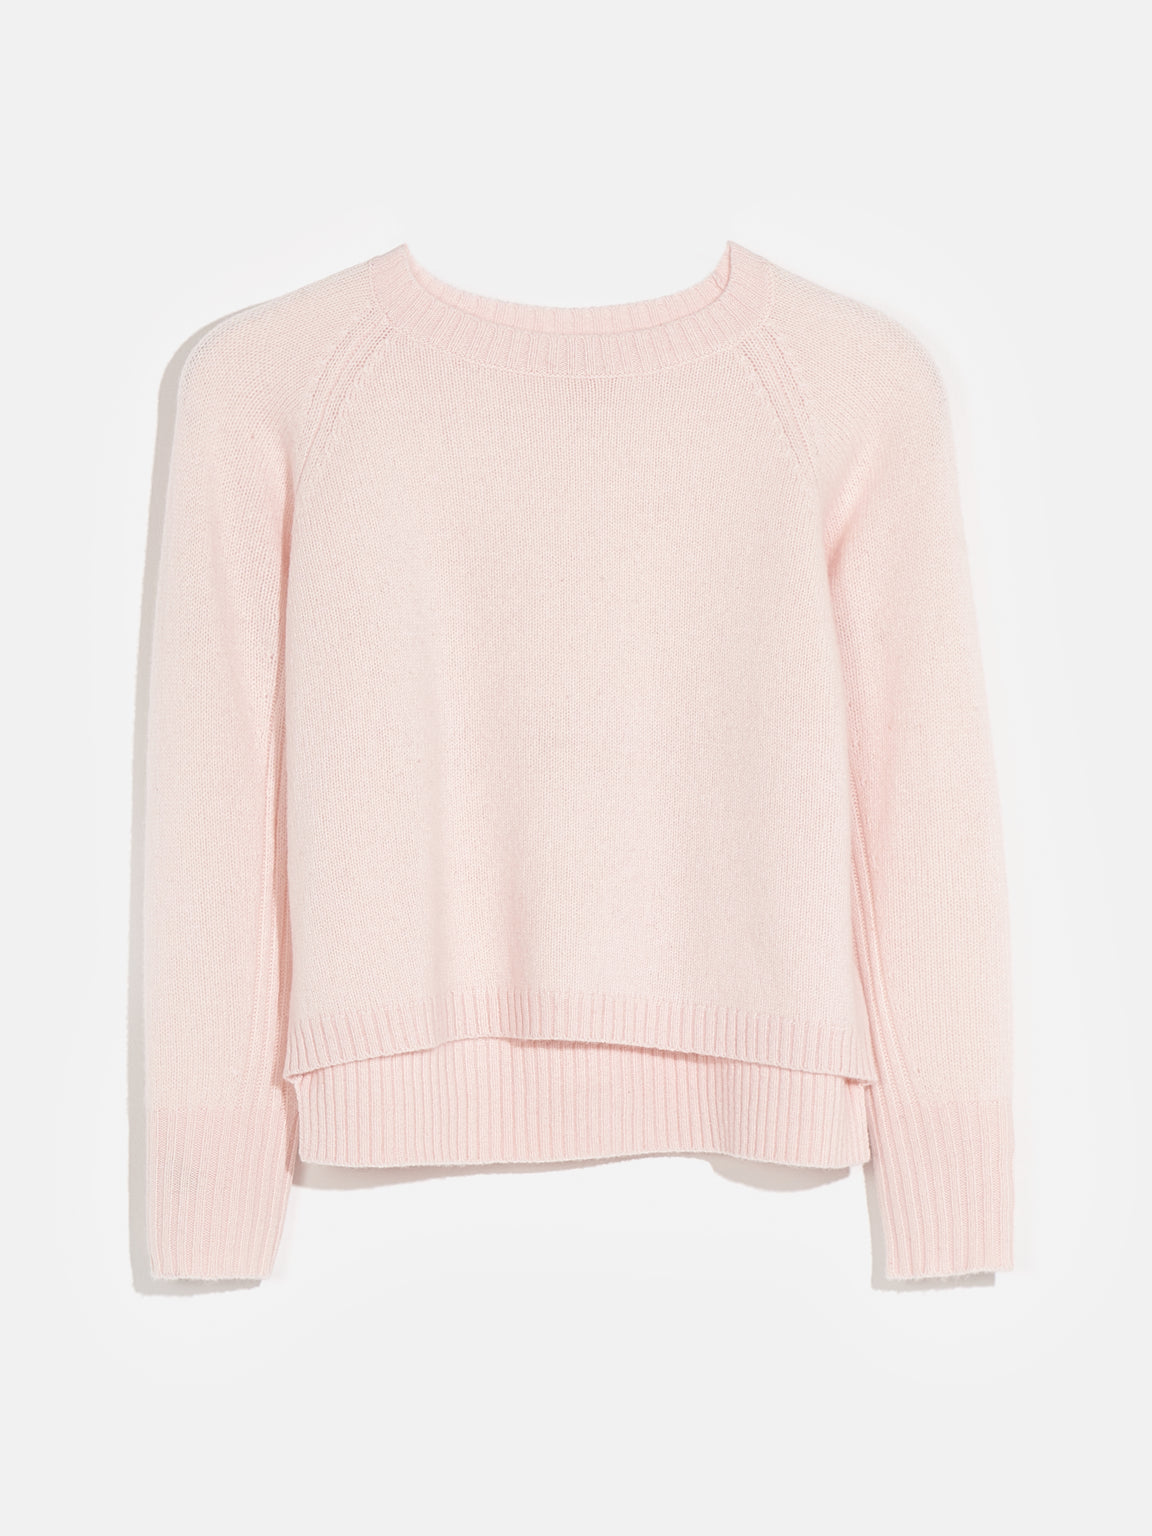 GIMTO SWEATER COTTON CANDY[PACKSHOT]